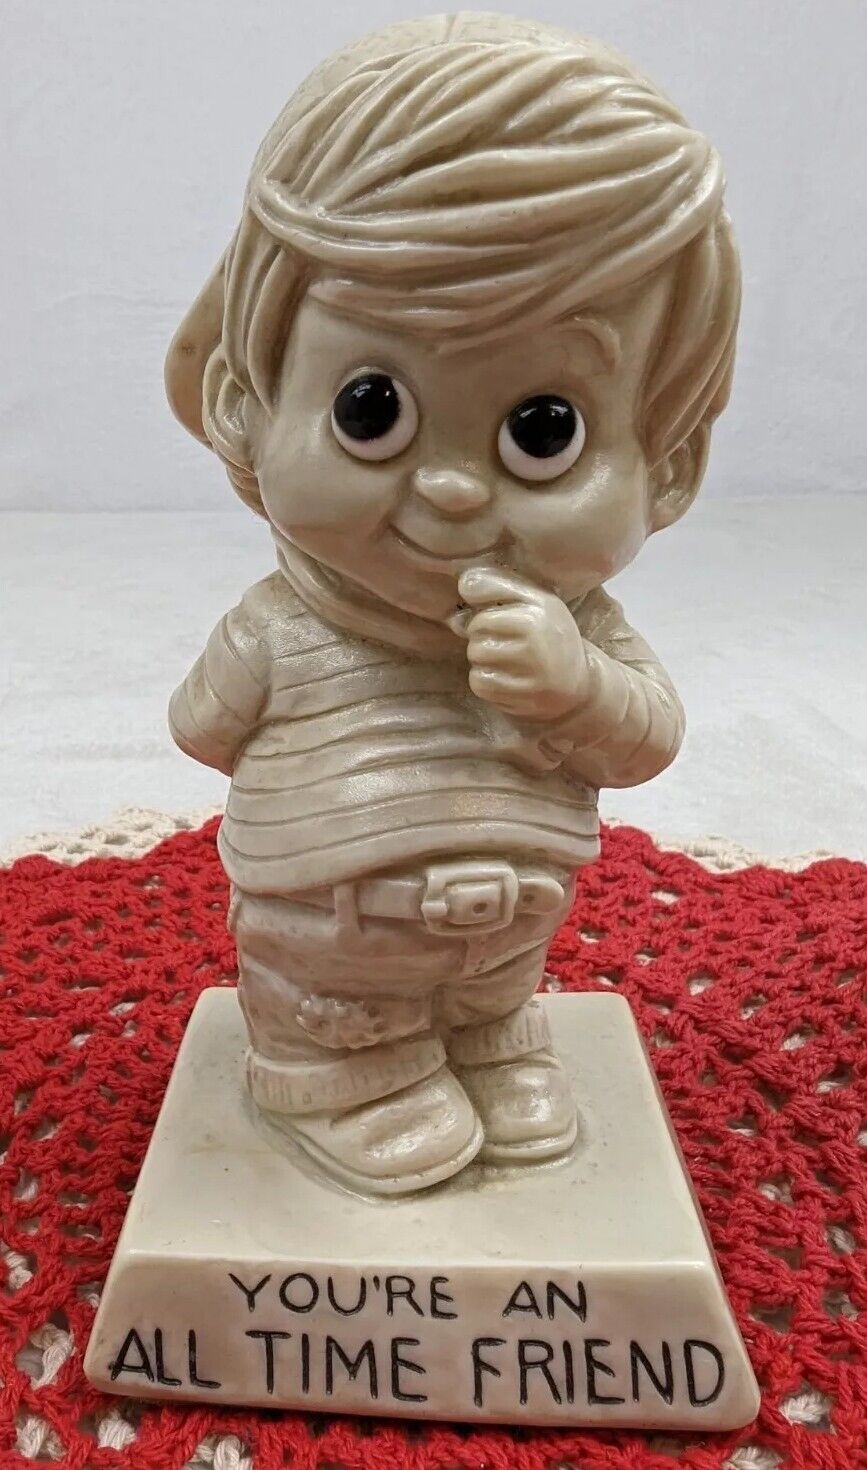 Vintage 70s Wallace Berrie Resin Figurine All Time Friend Mid Century Kid Statue